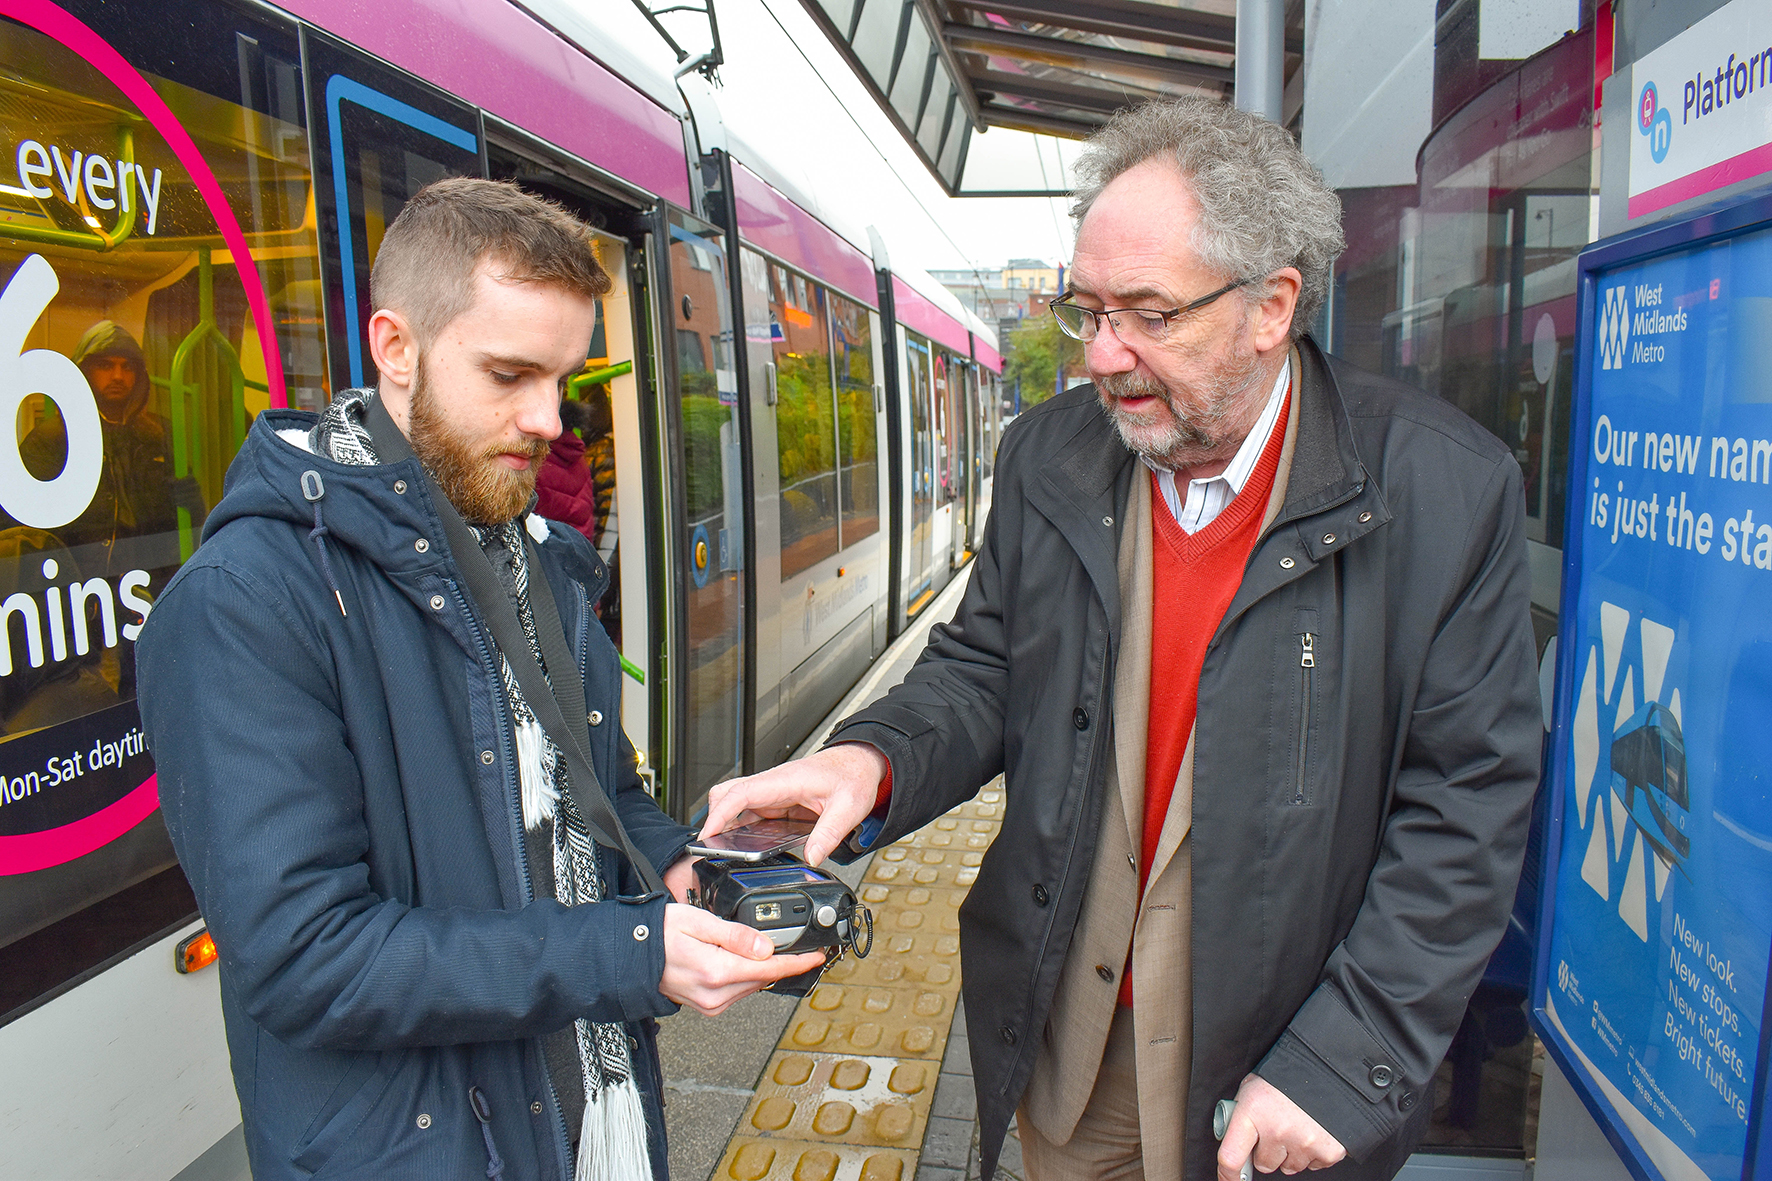 Cllr Roger Lawrence uses the Swift on Mobile app